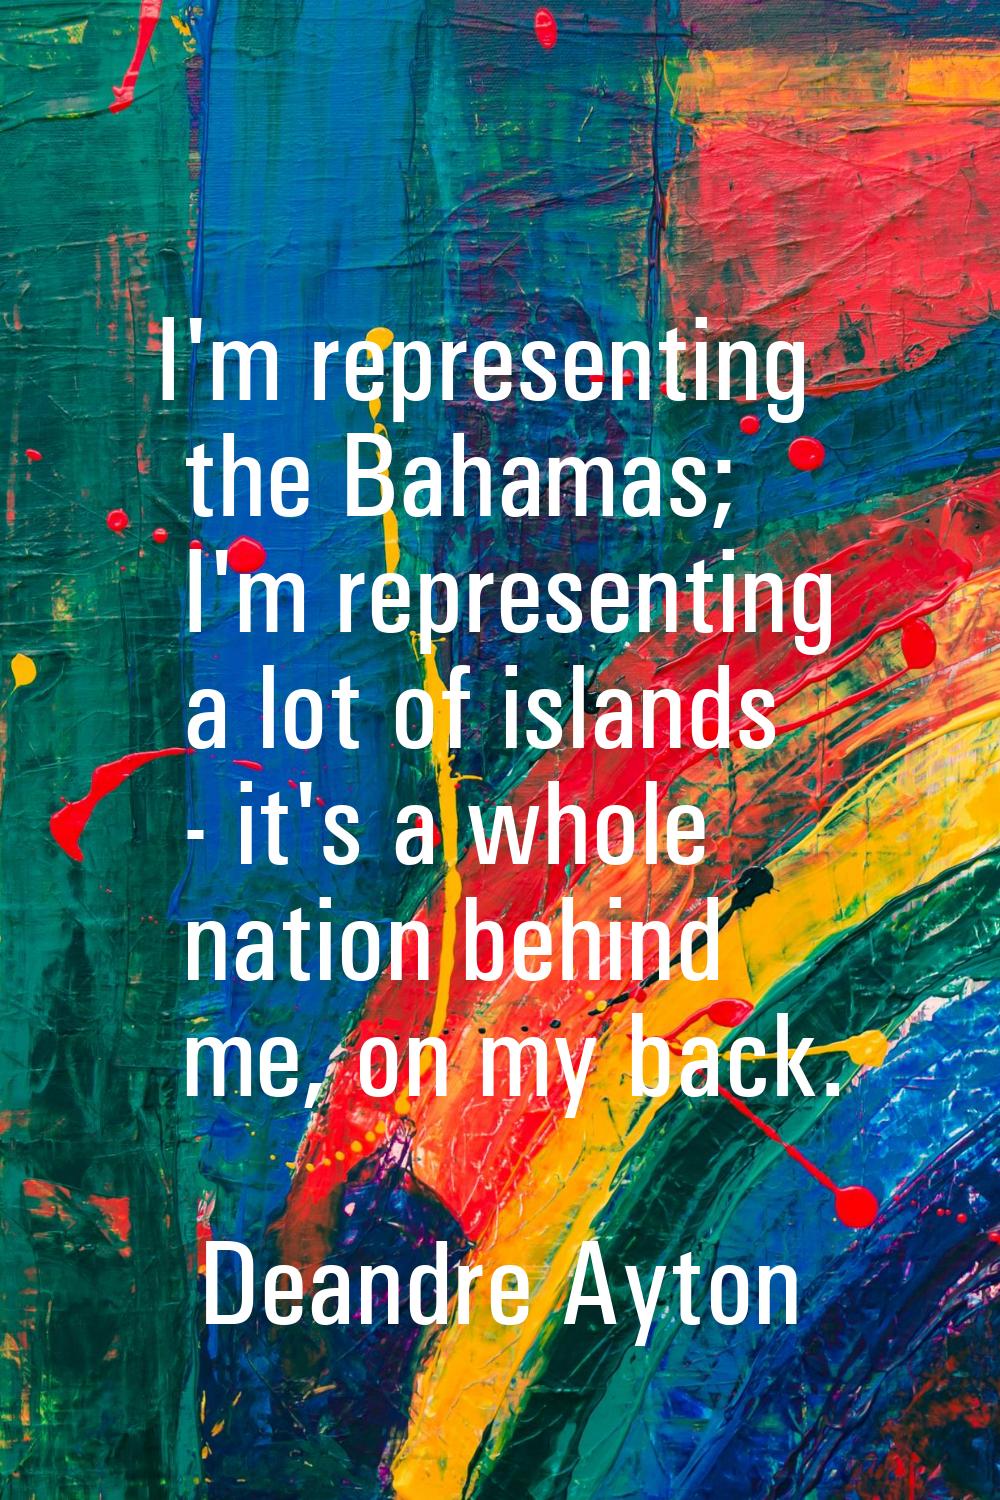 I'm representing the Bahamas; I'm representing a lot of islands - it's a whole nation behind me, on